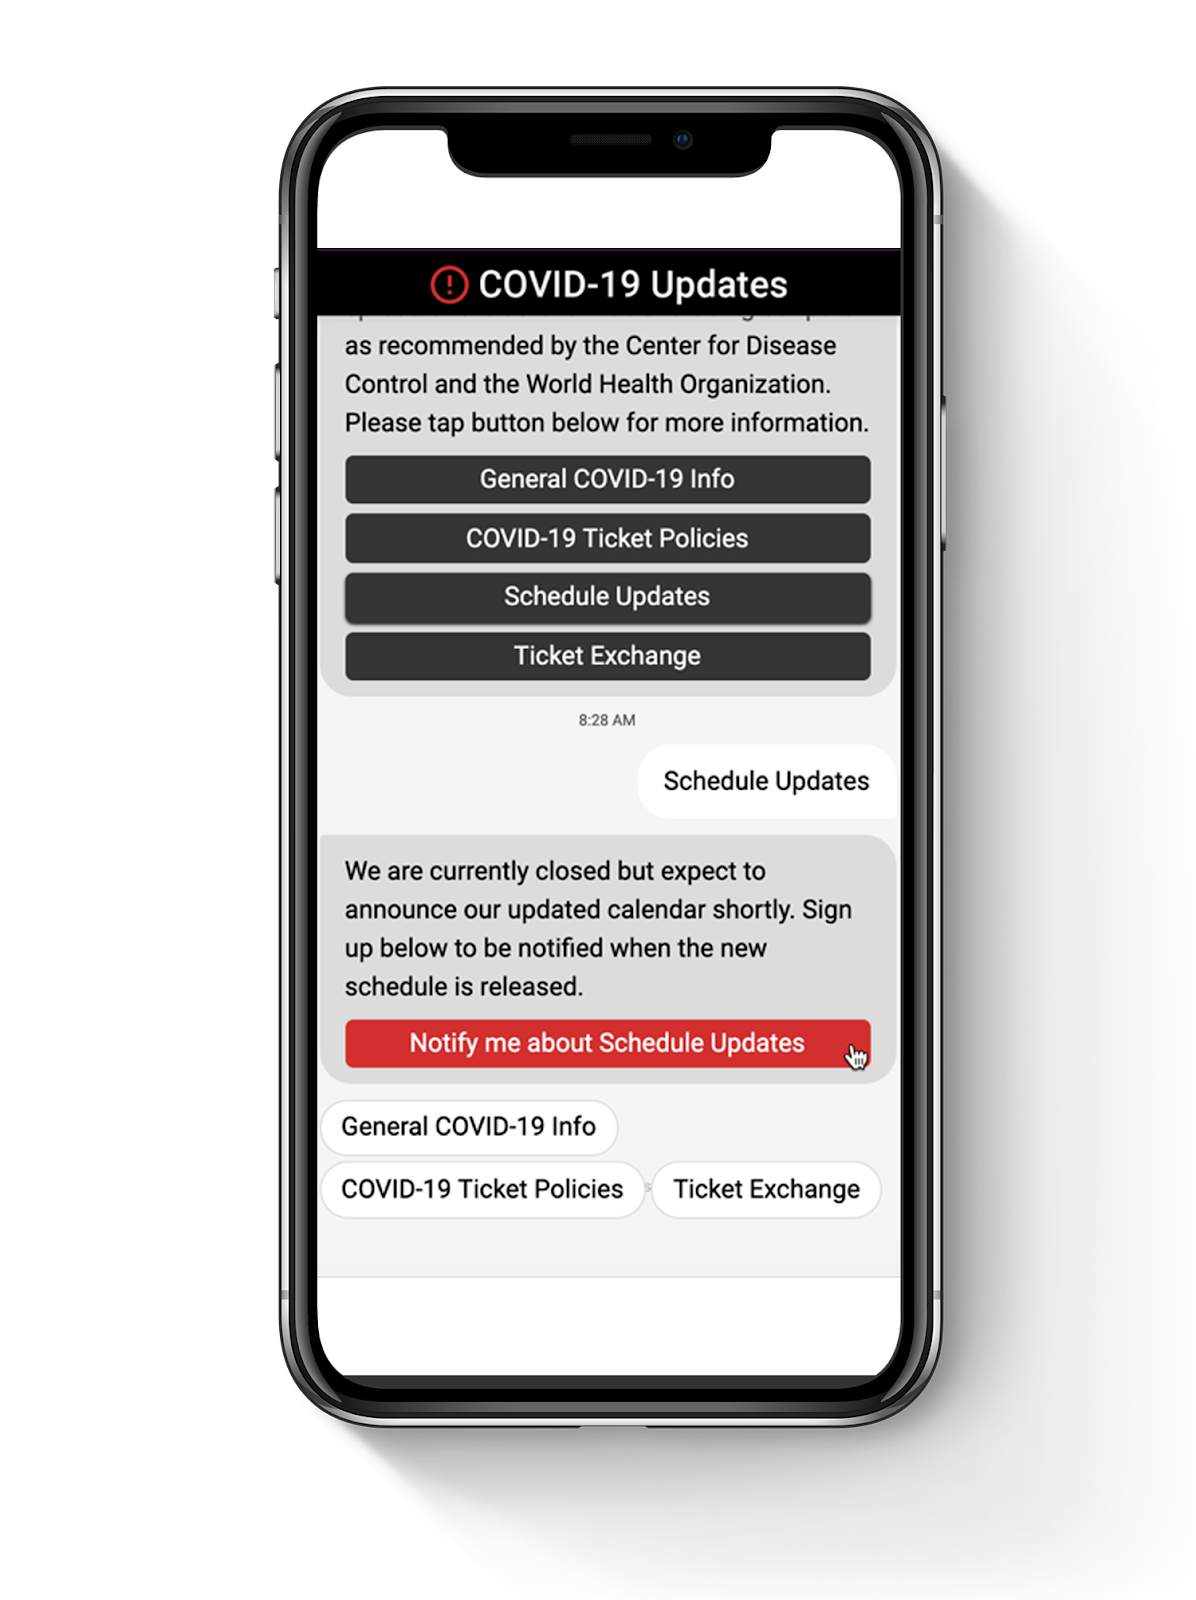 COVID 19 Updates on mobile device